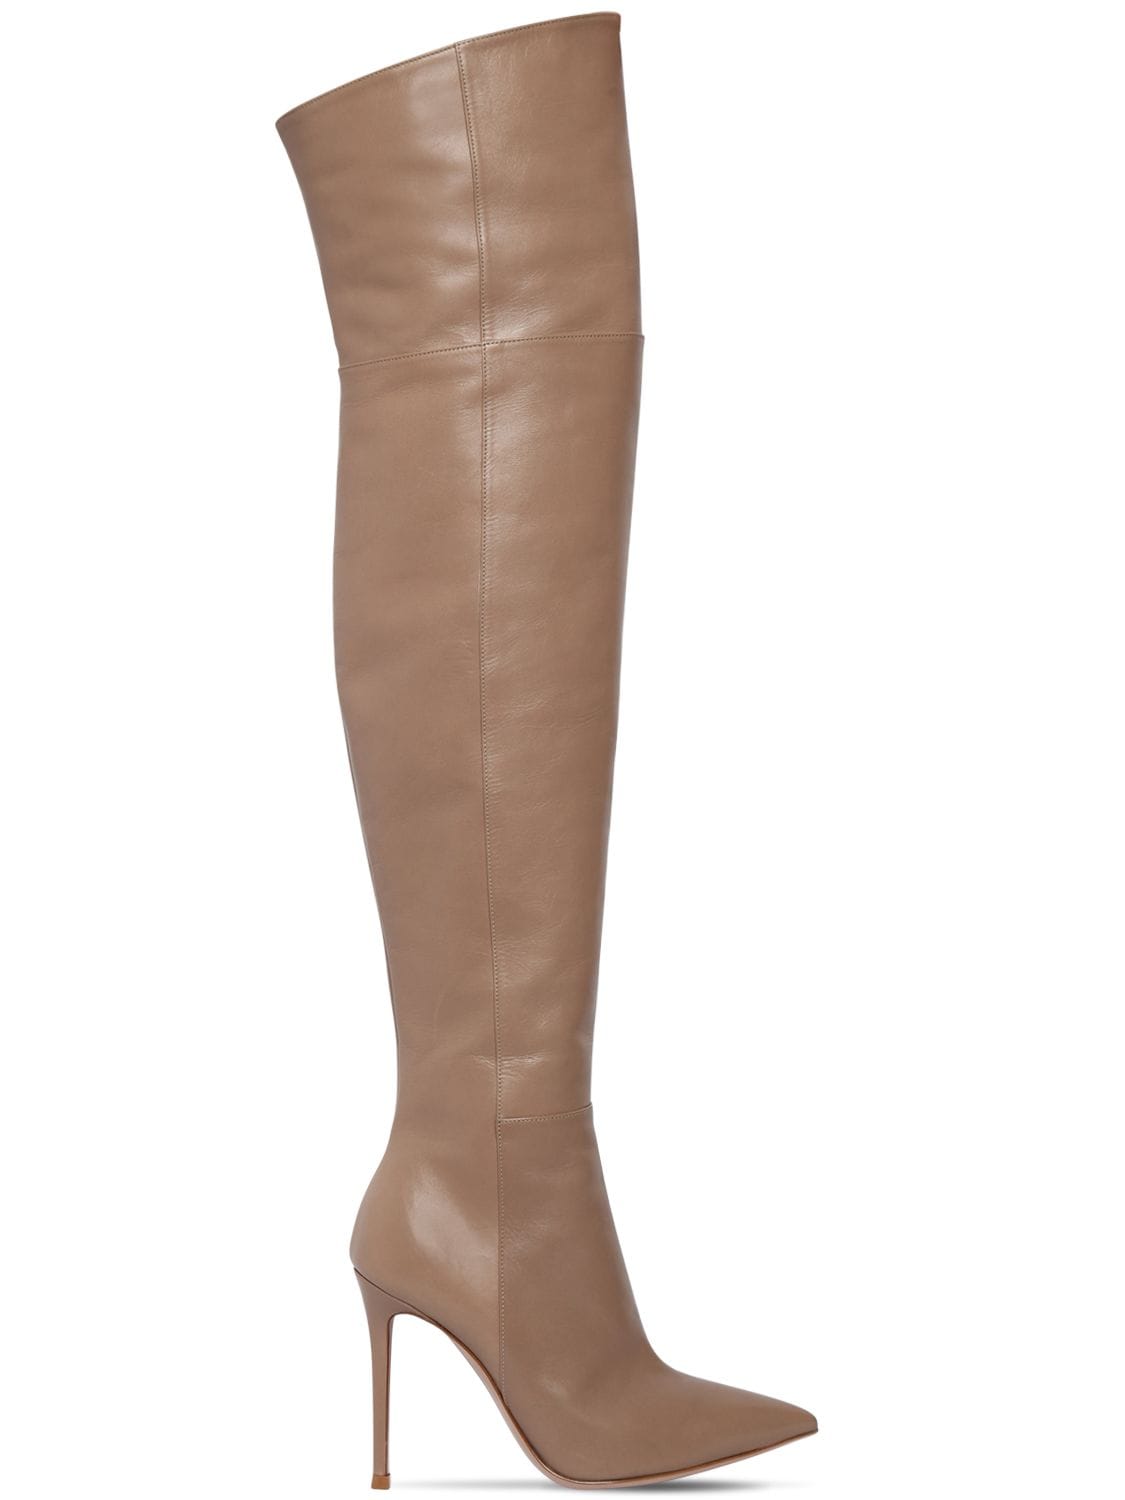 Gianvito Rossi 100mm Over The Knee Nappa Leather Boots In Beige